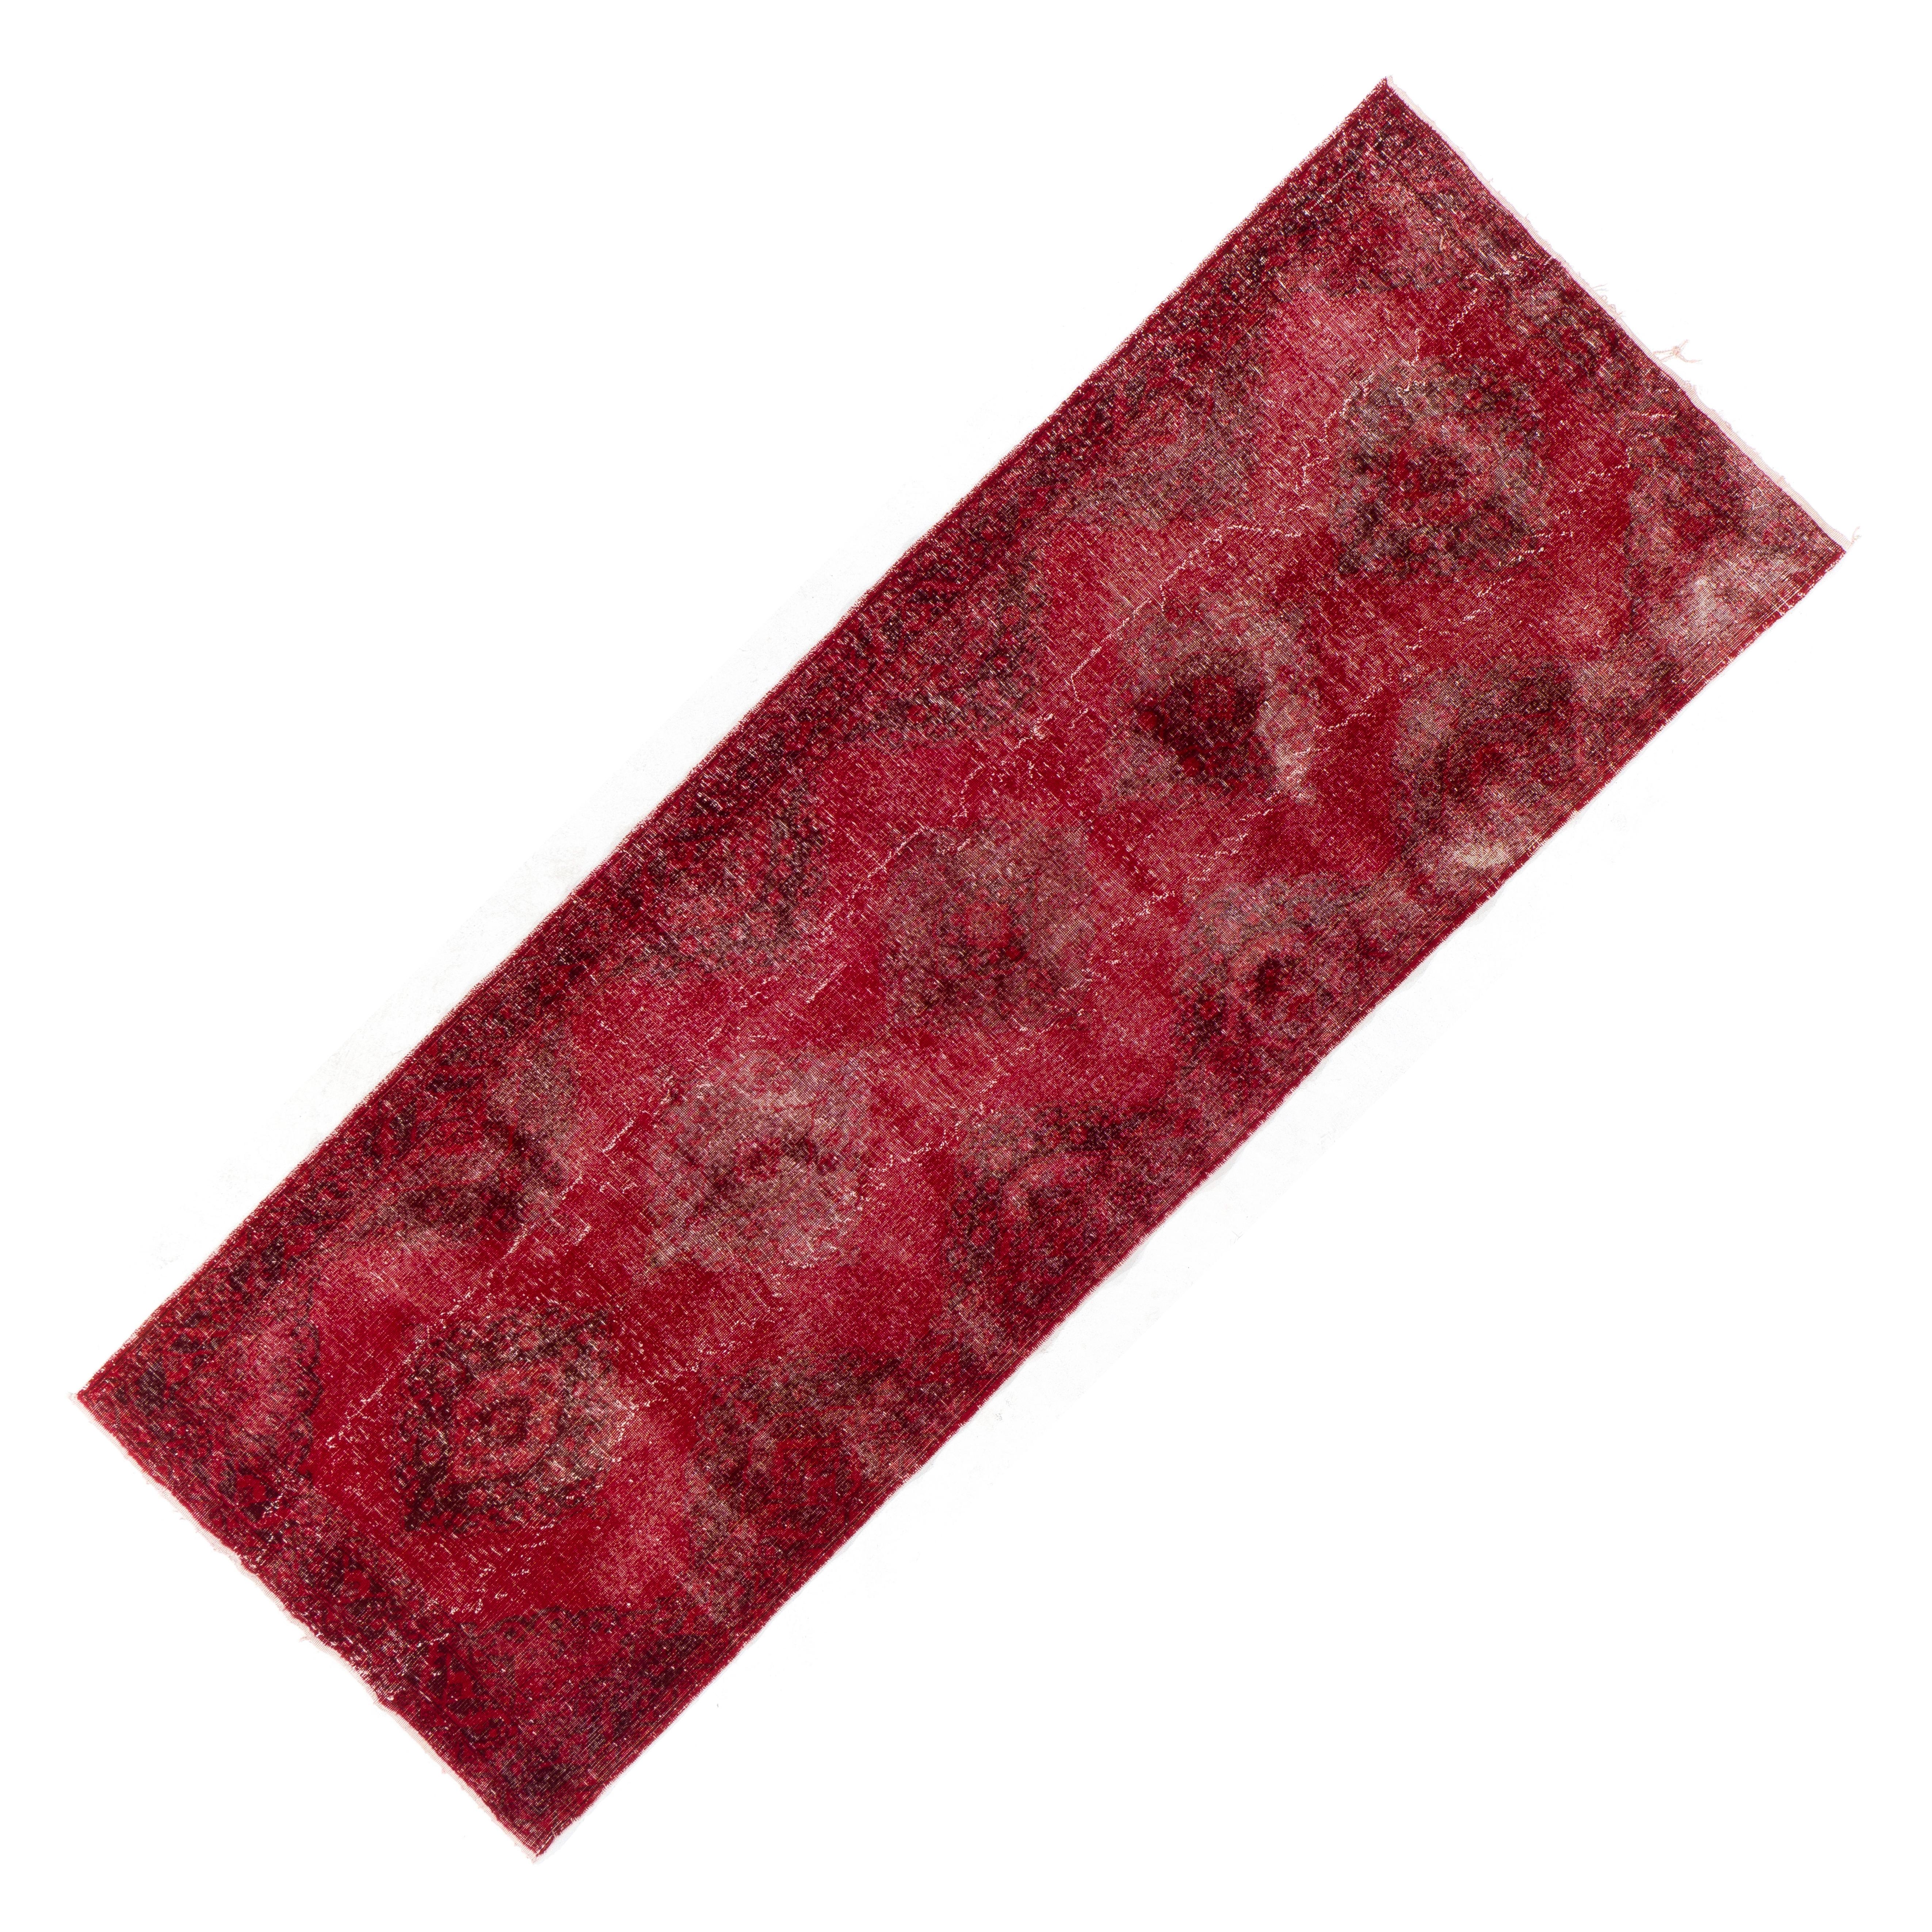 Mid-20th Century 4.8x13 Ft Distressed Vintage Turkish Runner Rug in Red. Modern Handmade Carpet For Sale